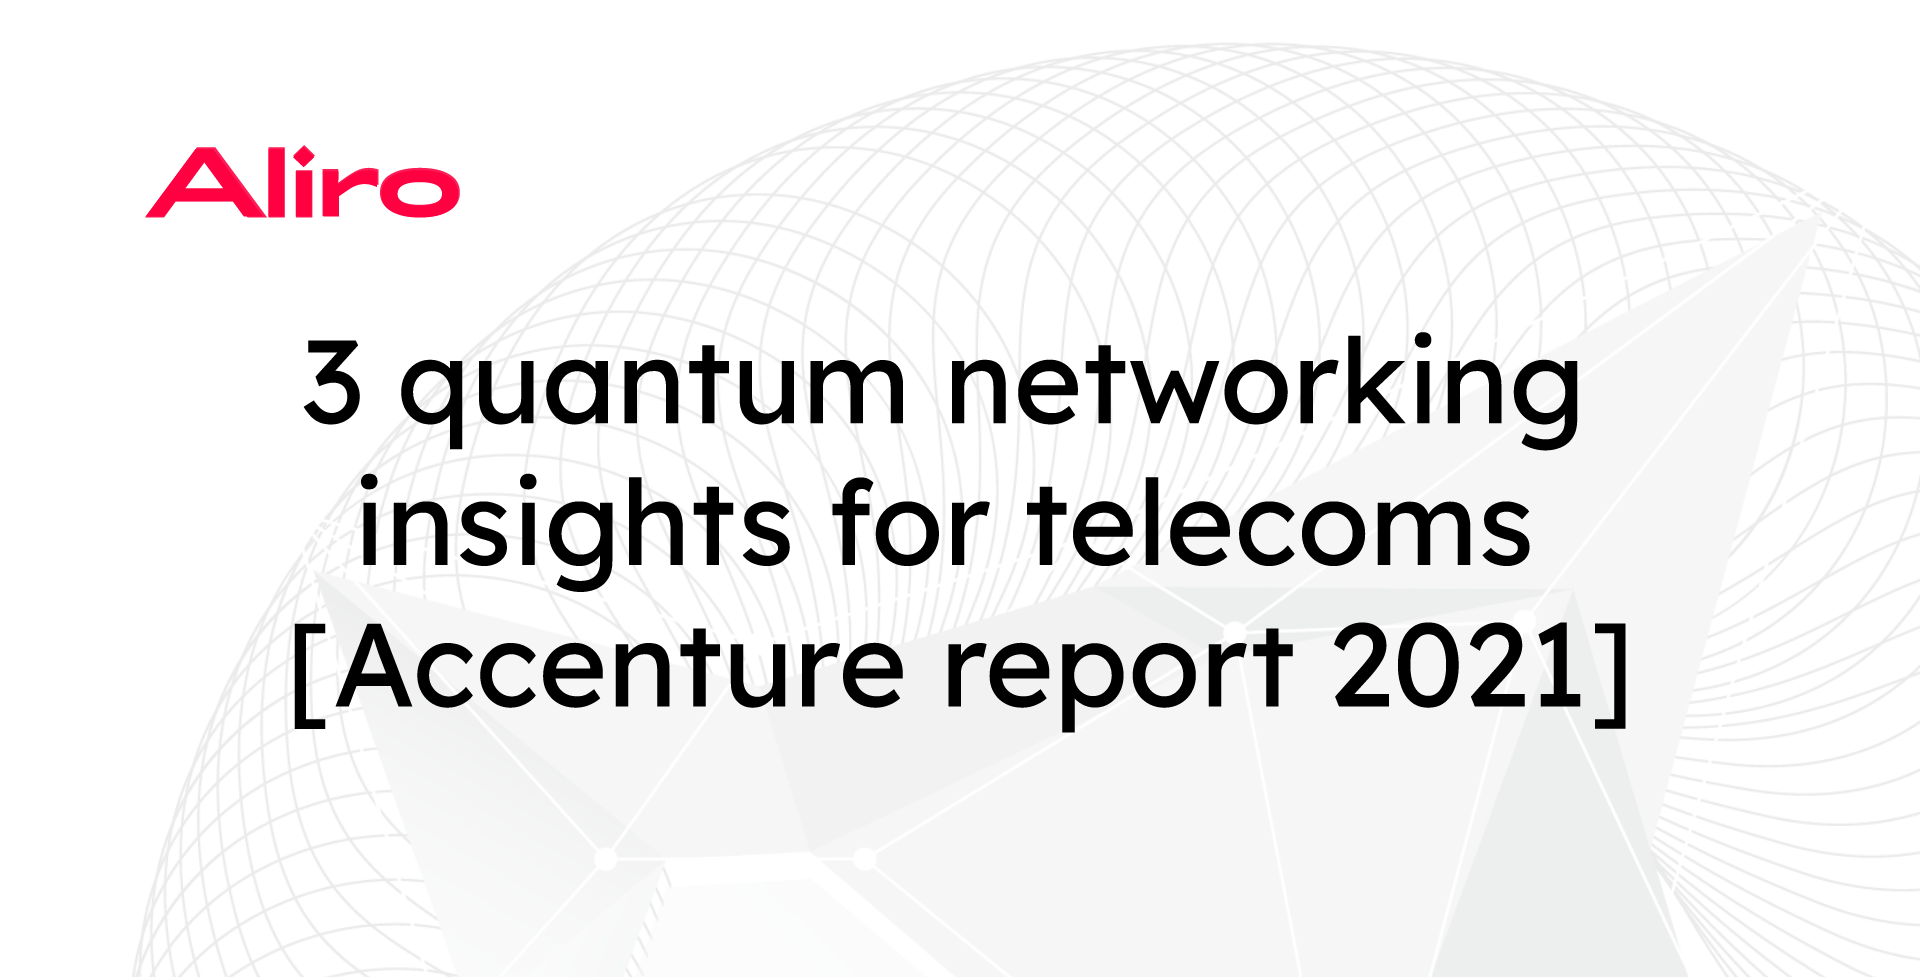 3 quantum networking insights for telecoms [Accenture report 2021]